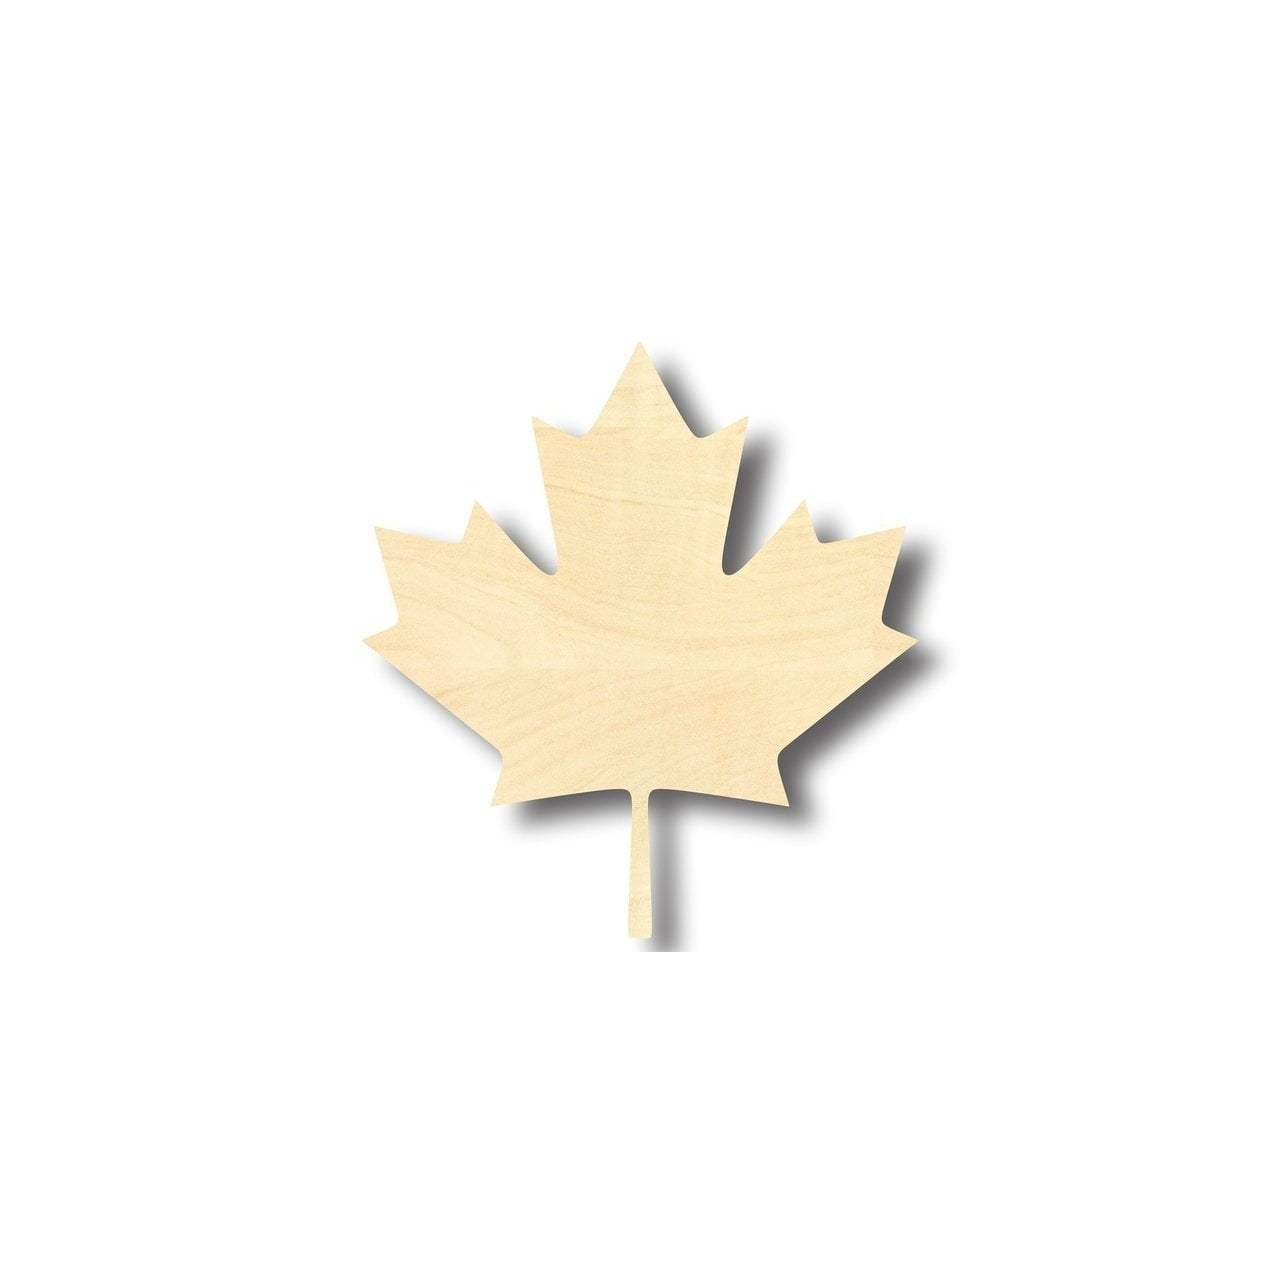 Canadian Maple Leaf Laser Cut Out Unfinished Wood Shape Craft Supply